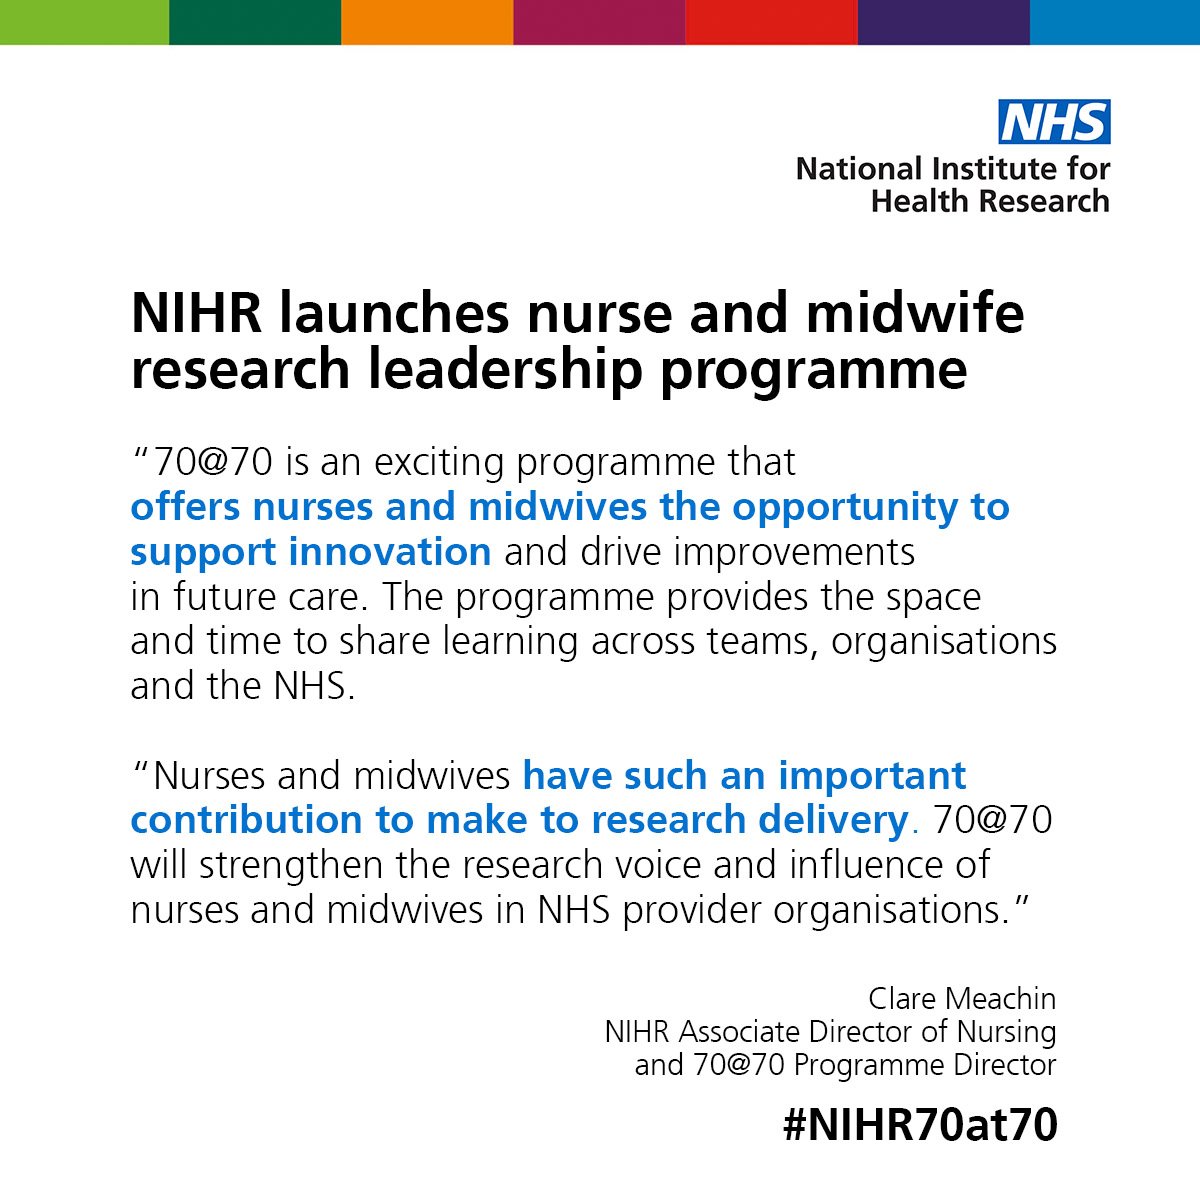 Open for applications! The brand new #NIHR nurse and midwife leadership programme bit.ly/NIHR70at70 #NIHR70at70 #clinicalresearch #CRNurse @FNightingaleF @TheQNI @NHSRDForum